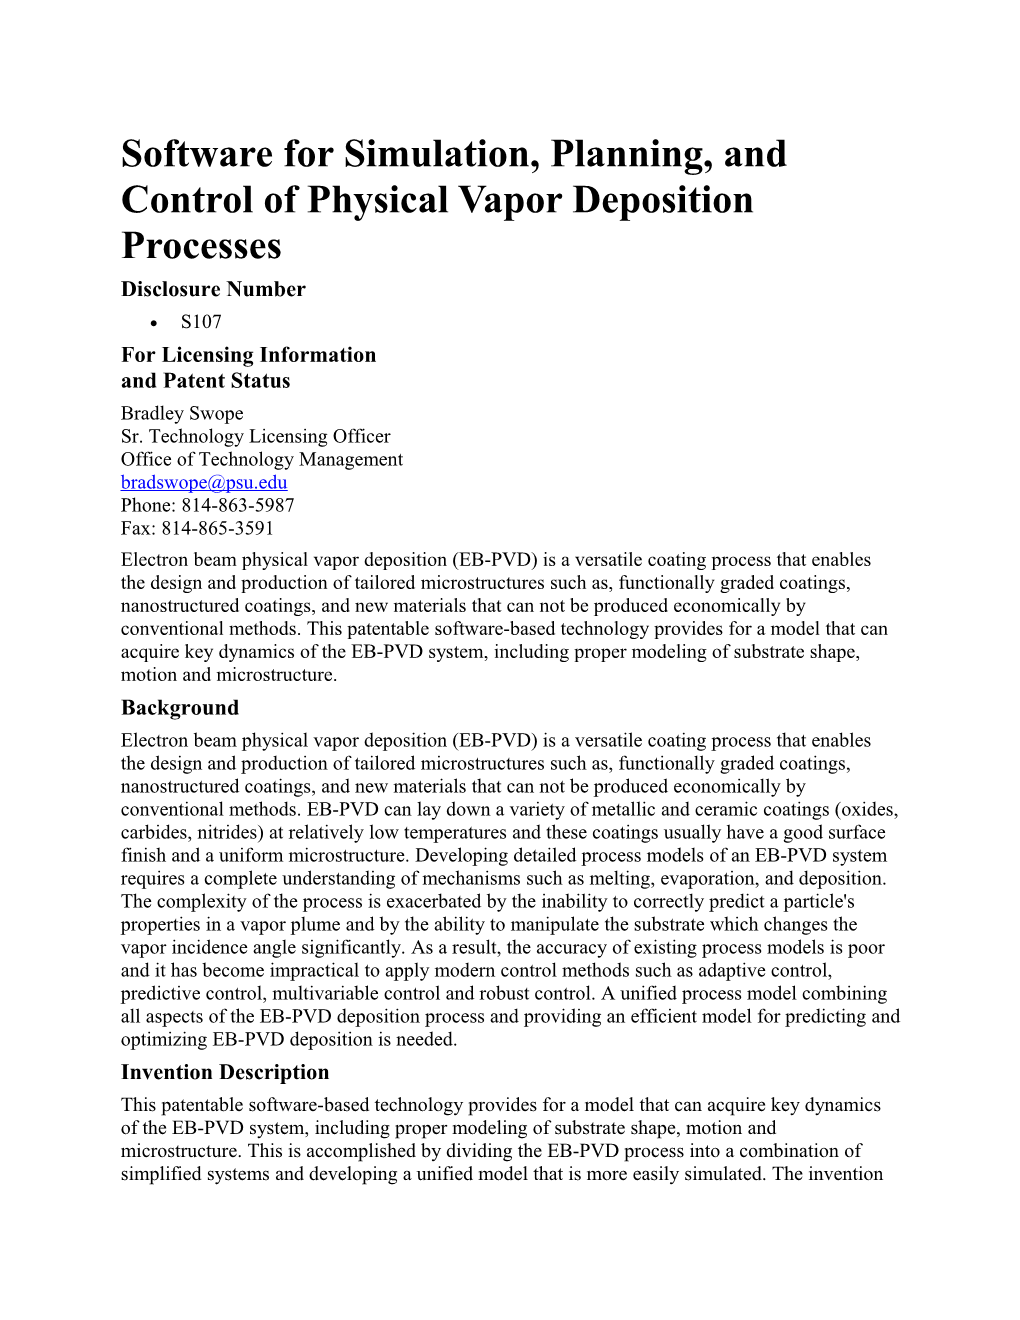 Software for Simulation, Planning, and Control of Physical Vapor Deposition Processes